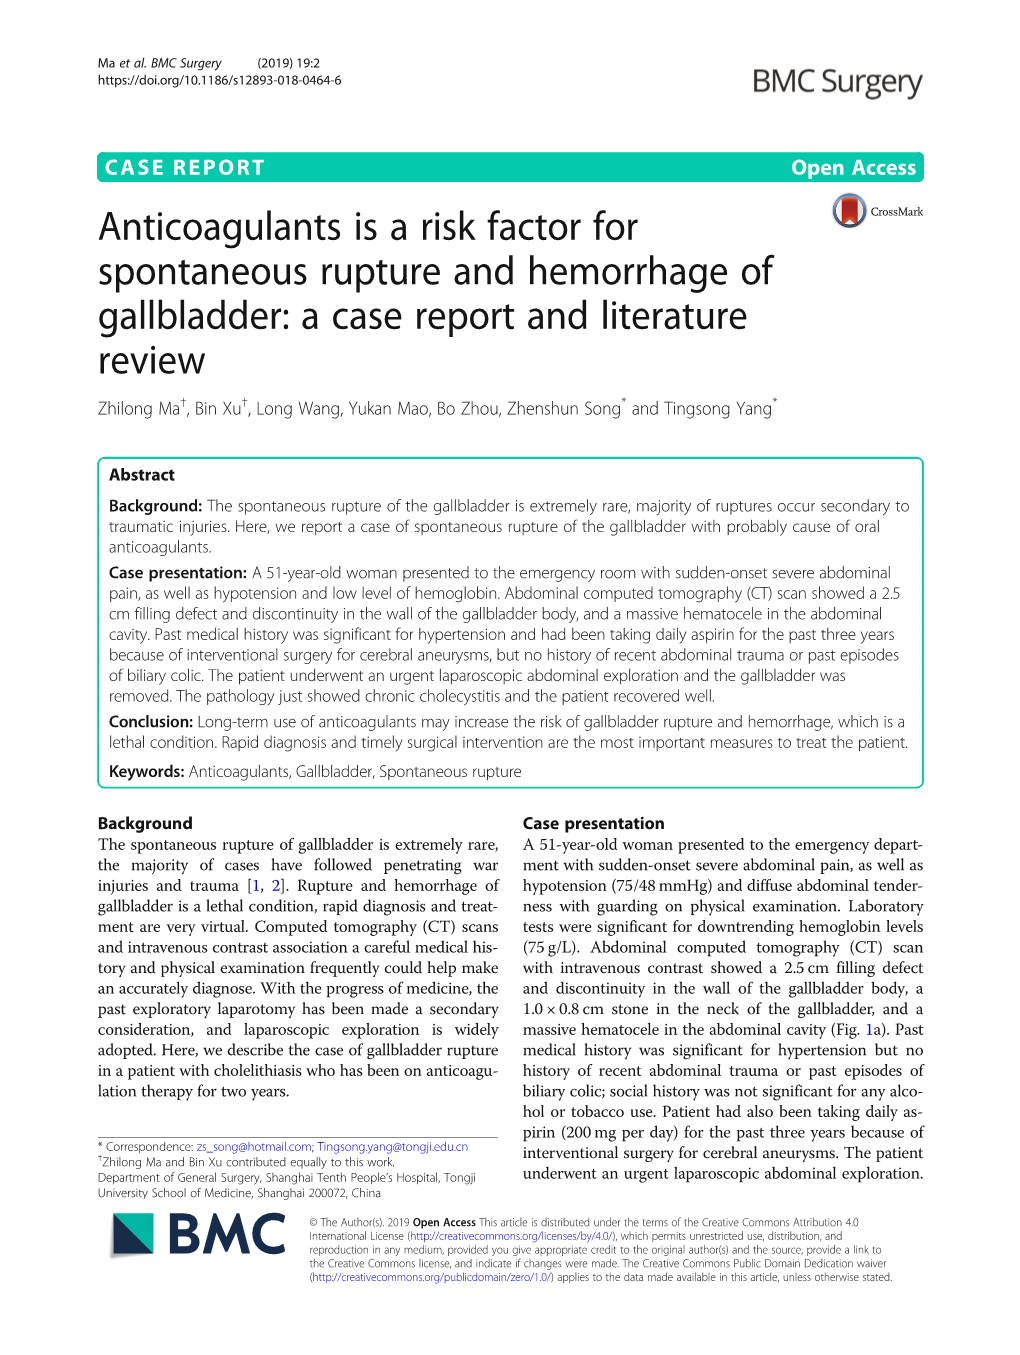 Anticoagulants Is a Risk Factor for Spontaneous Rupture and Hemorrhage of Gallbladder: a Case Report and Literature Review